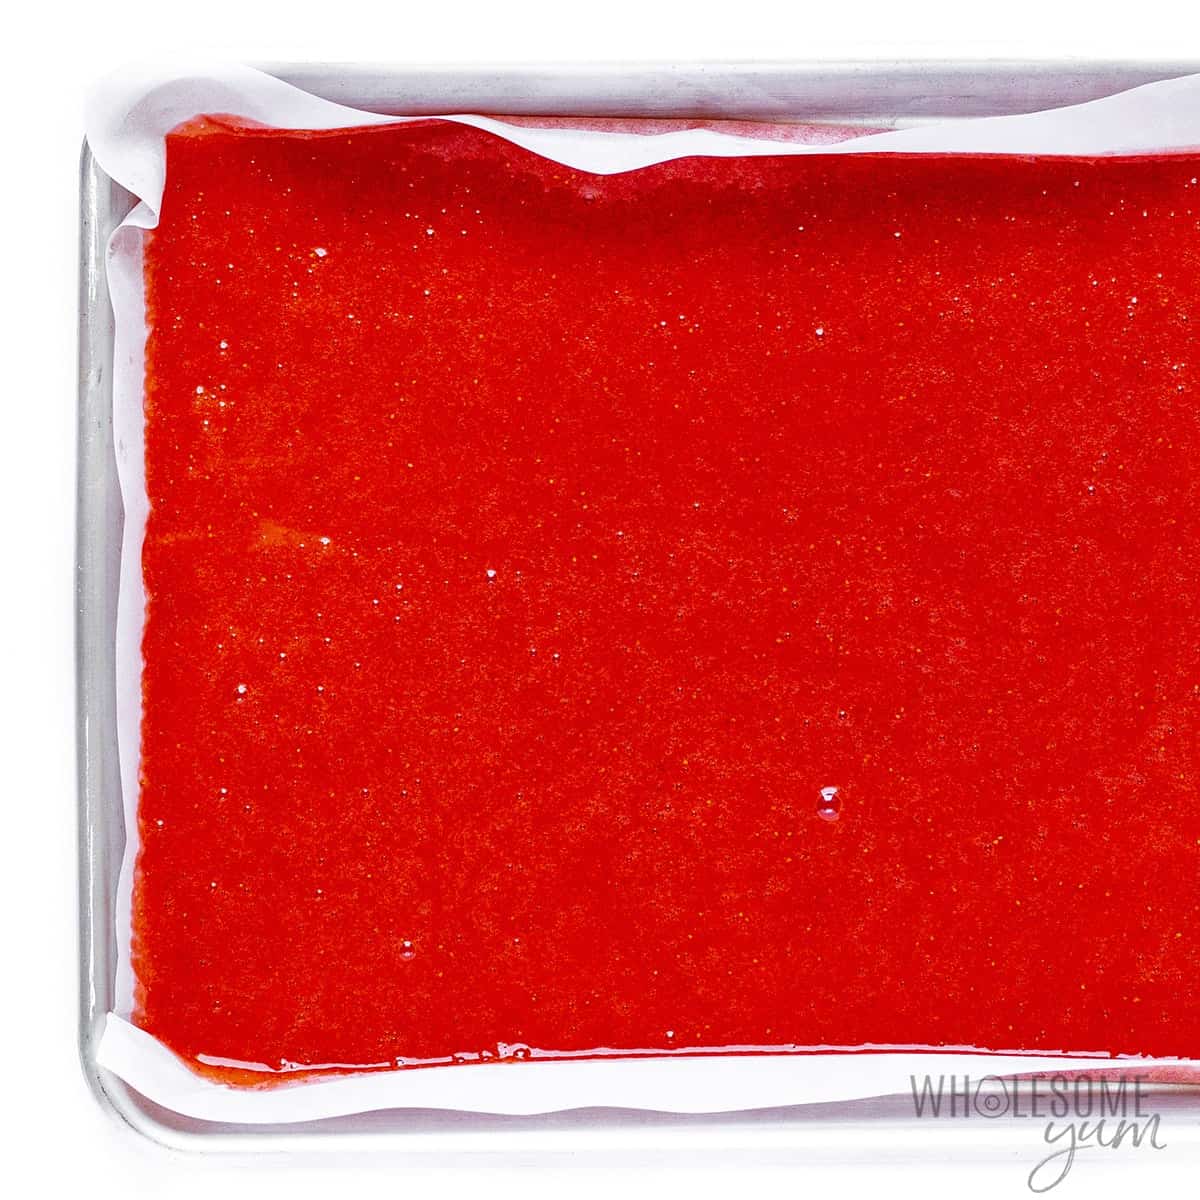 Fruit puree spread out on parchment lined pan.